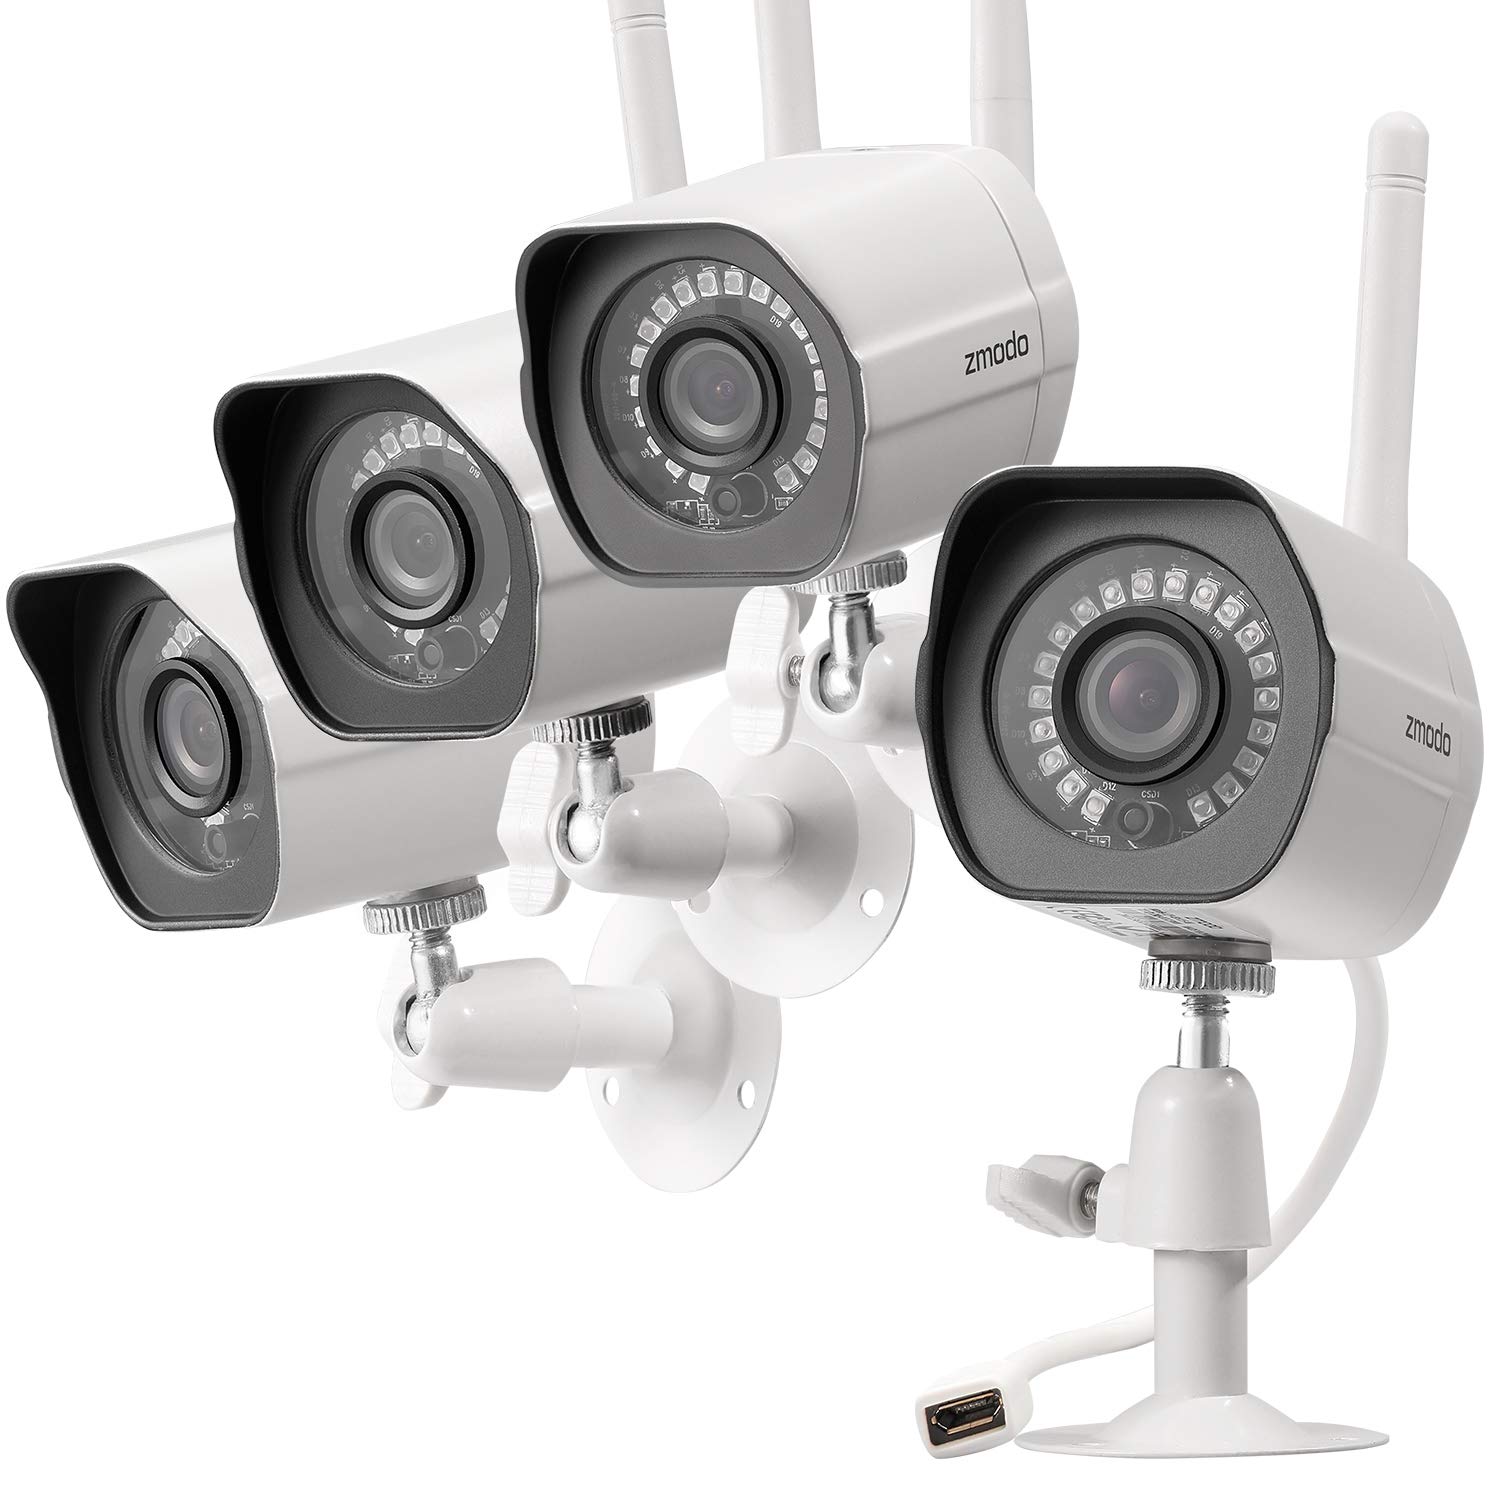 Security camera monitoring system